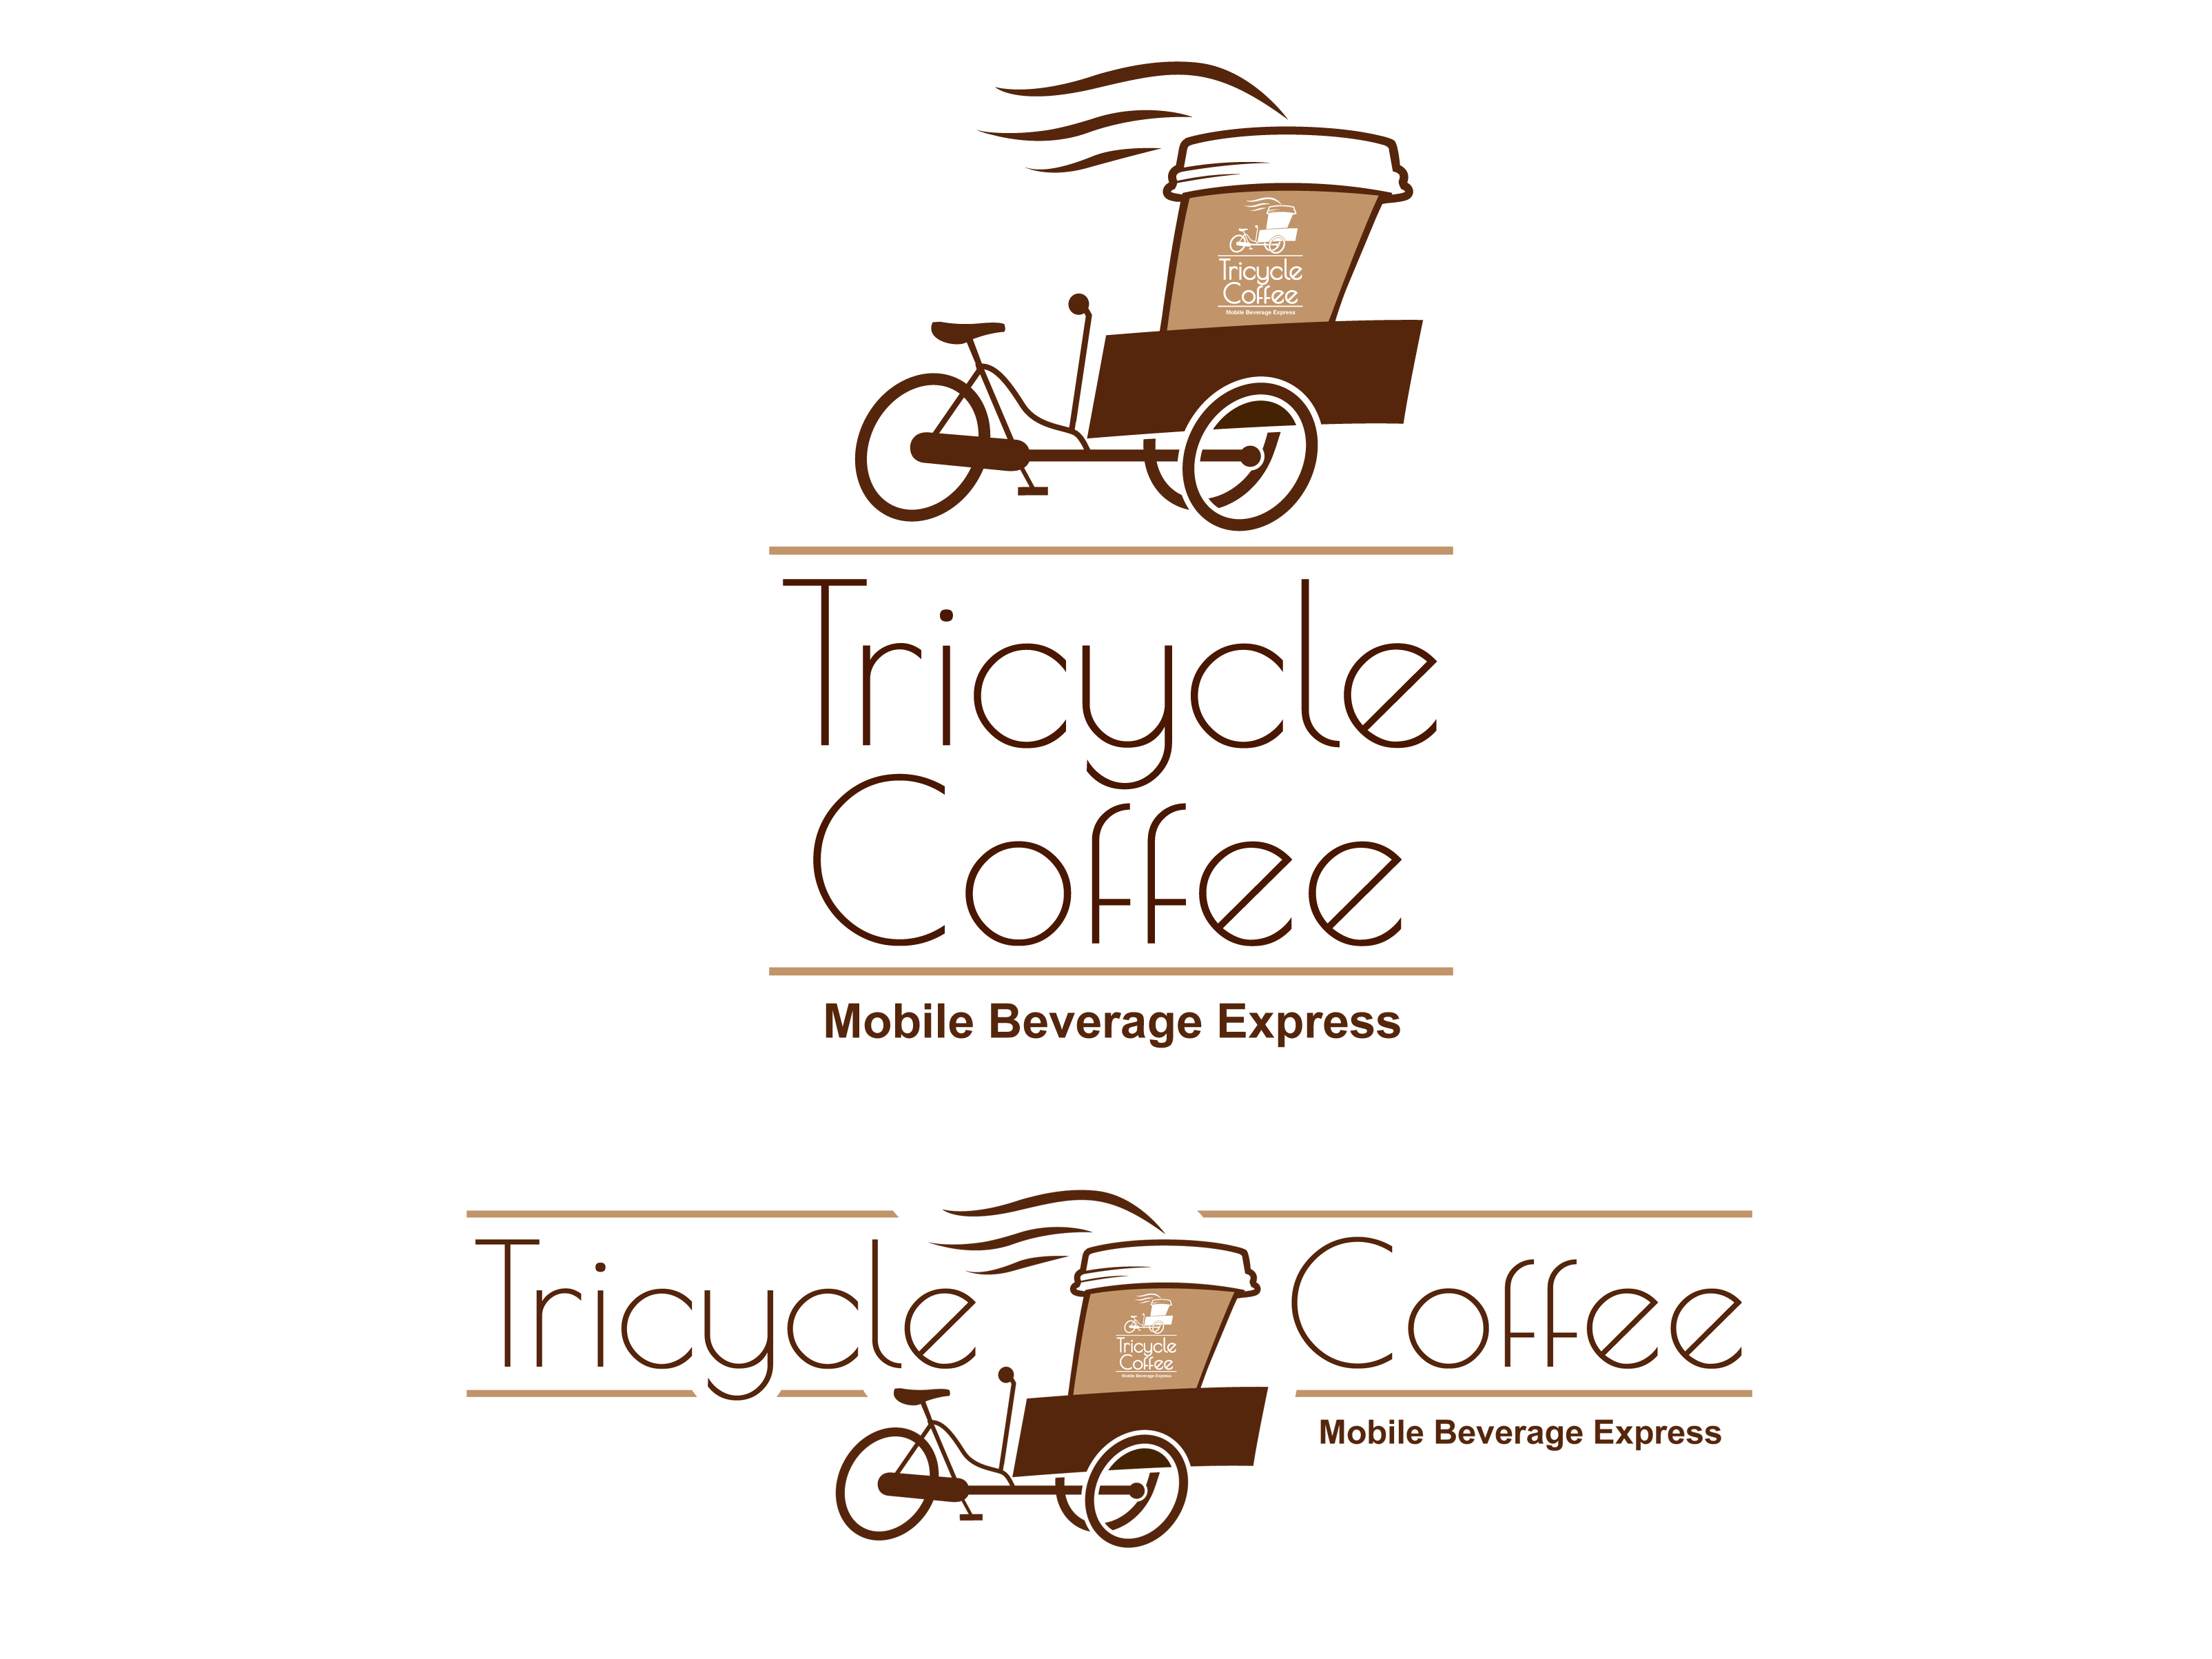 Tricycle Logo - Logo Design #209 | 'Tricycle Coffee' design project | DesignContest ®